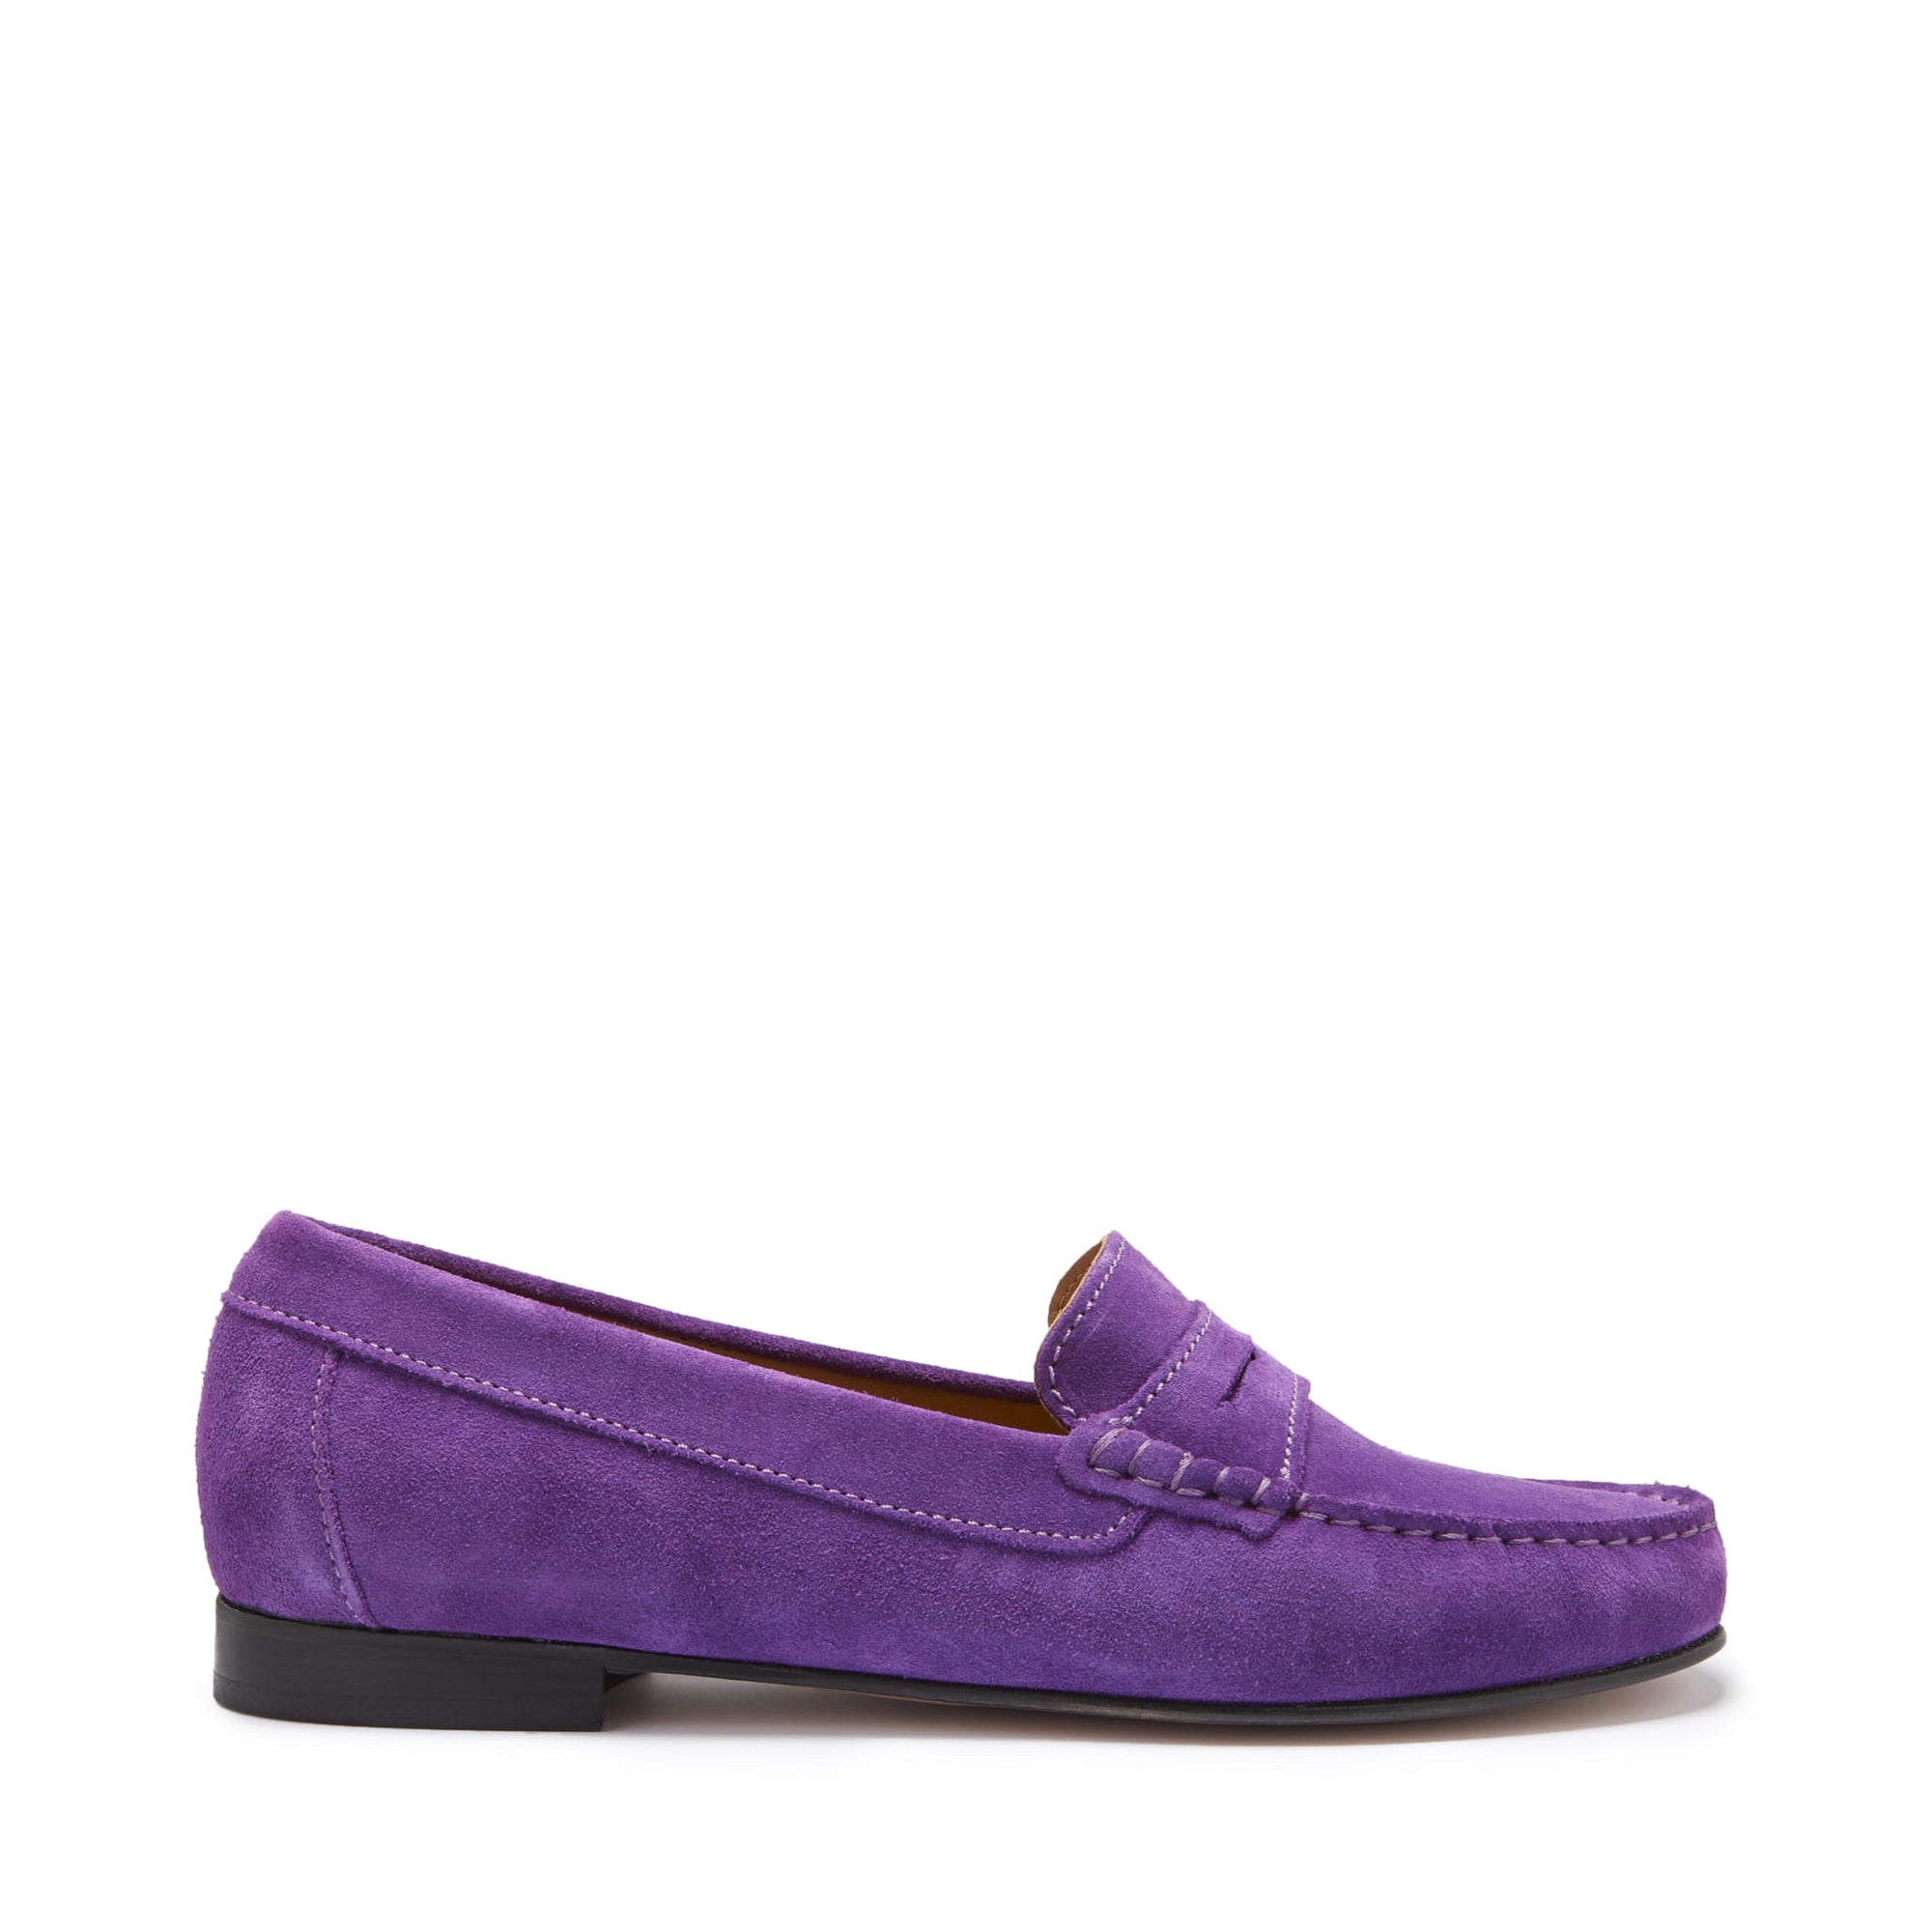 Women's Penny Loafers Leather Sole, purple suede